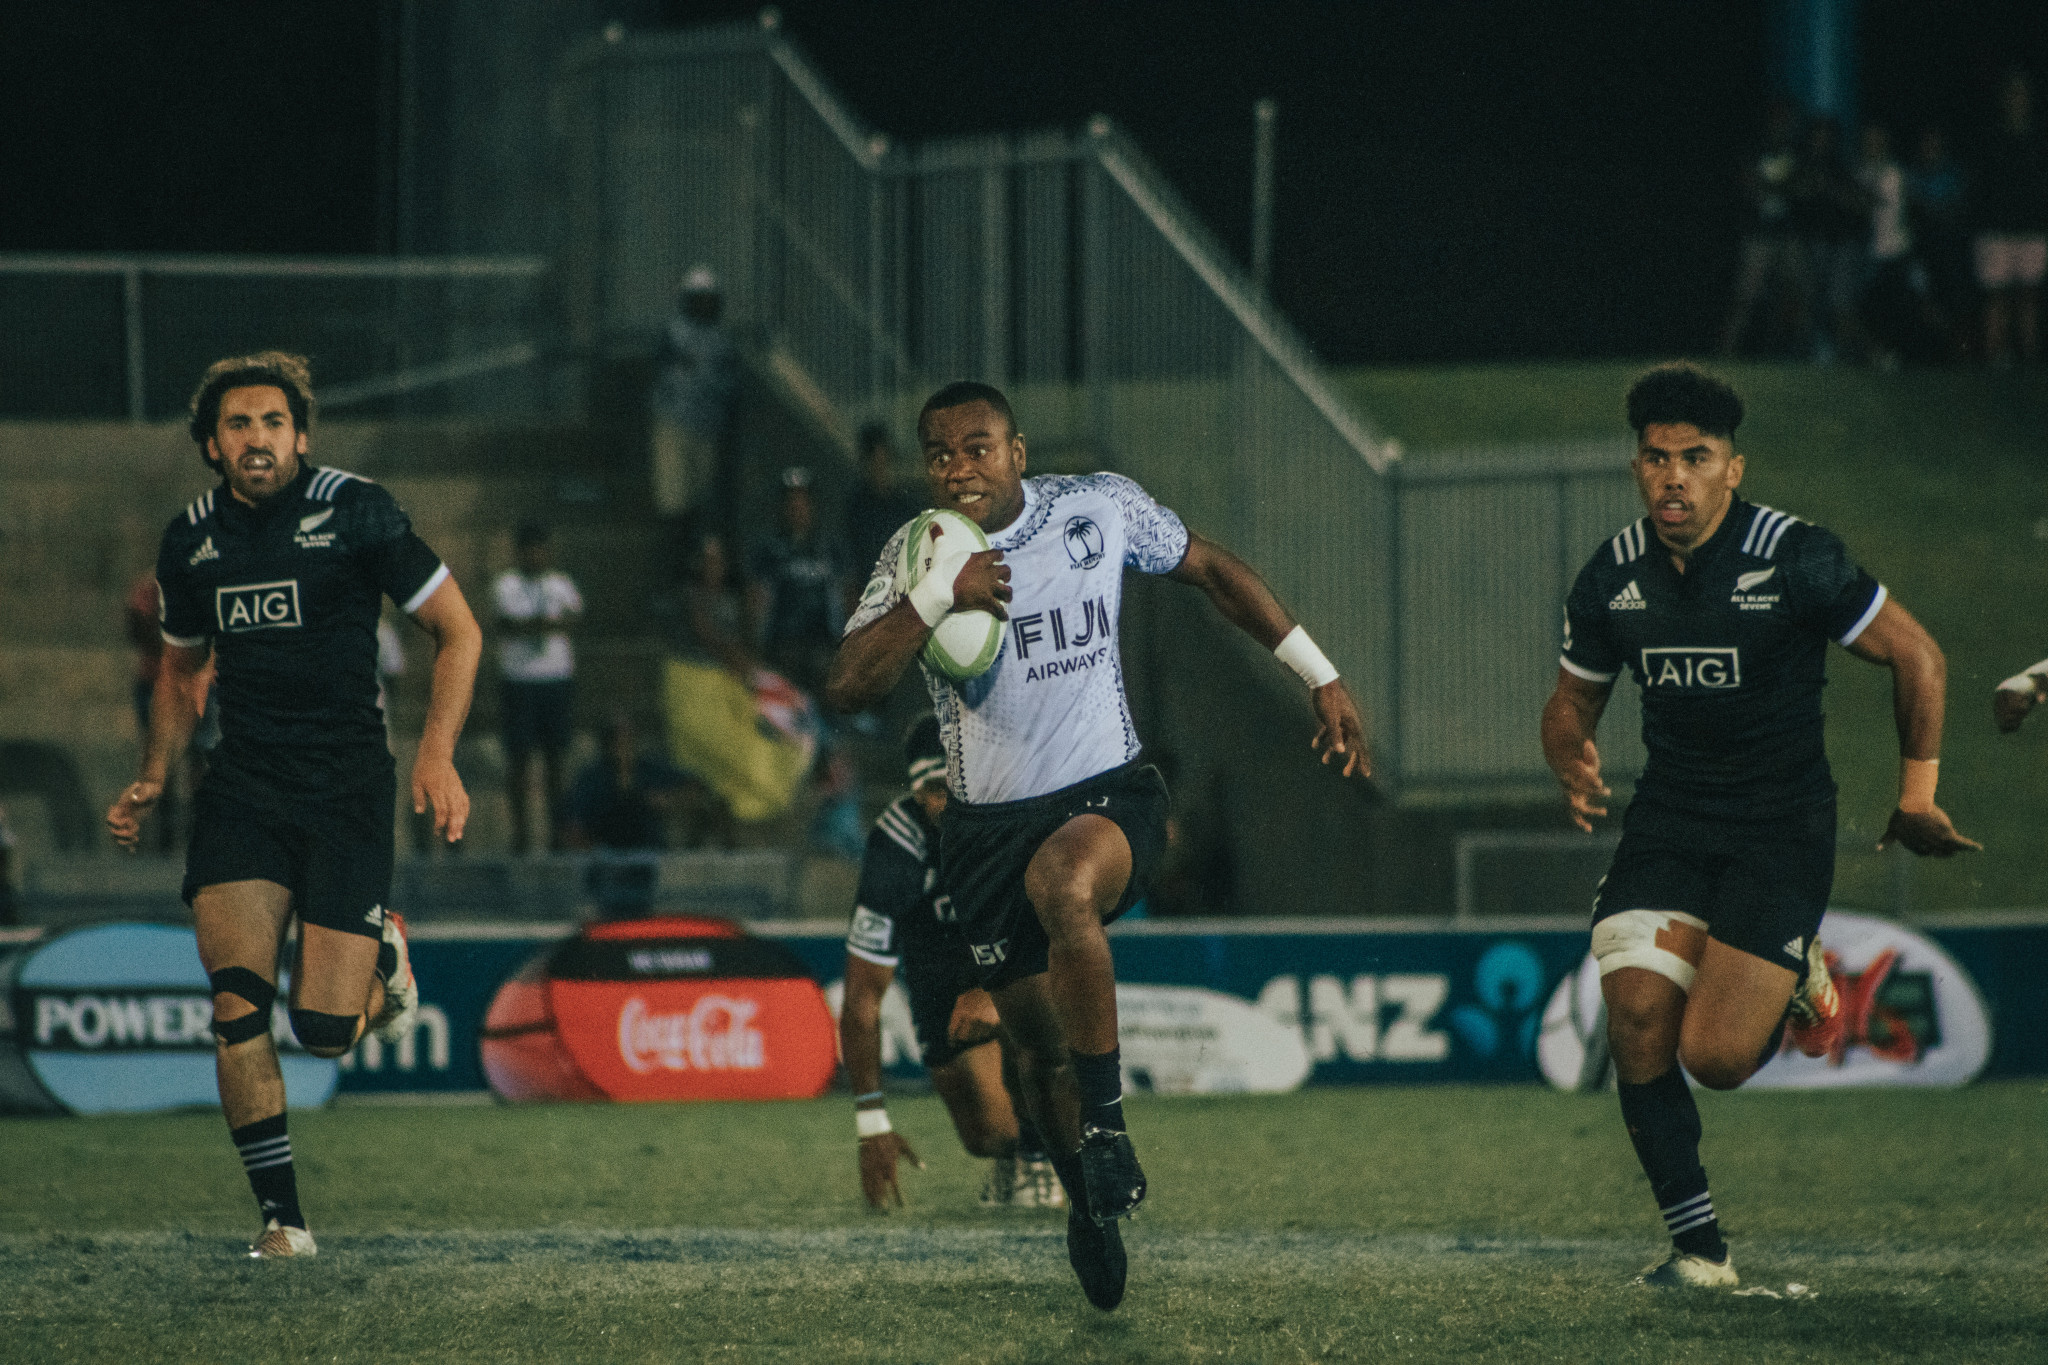 Olympic champions Fiji managed to recover from the edge of defeat against New Zealand to win the Oceania Rugby Sevens title in Suva ©Oceania Rugby